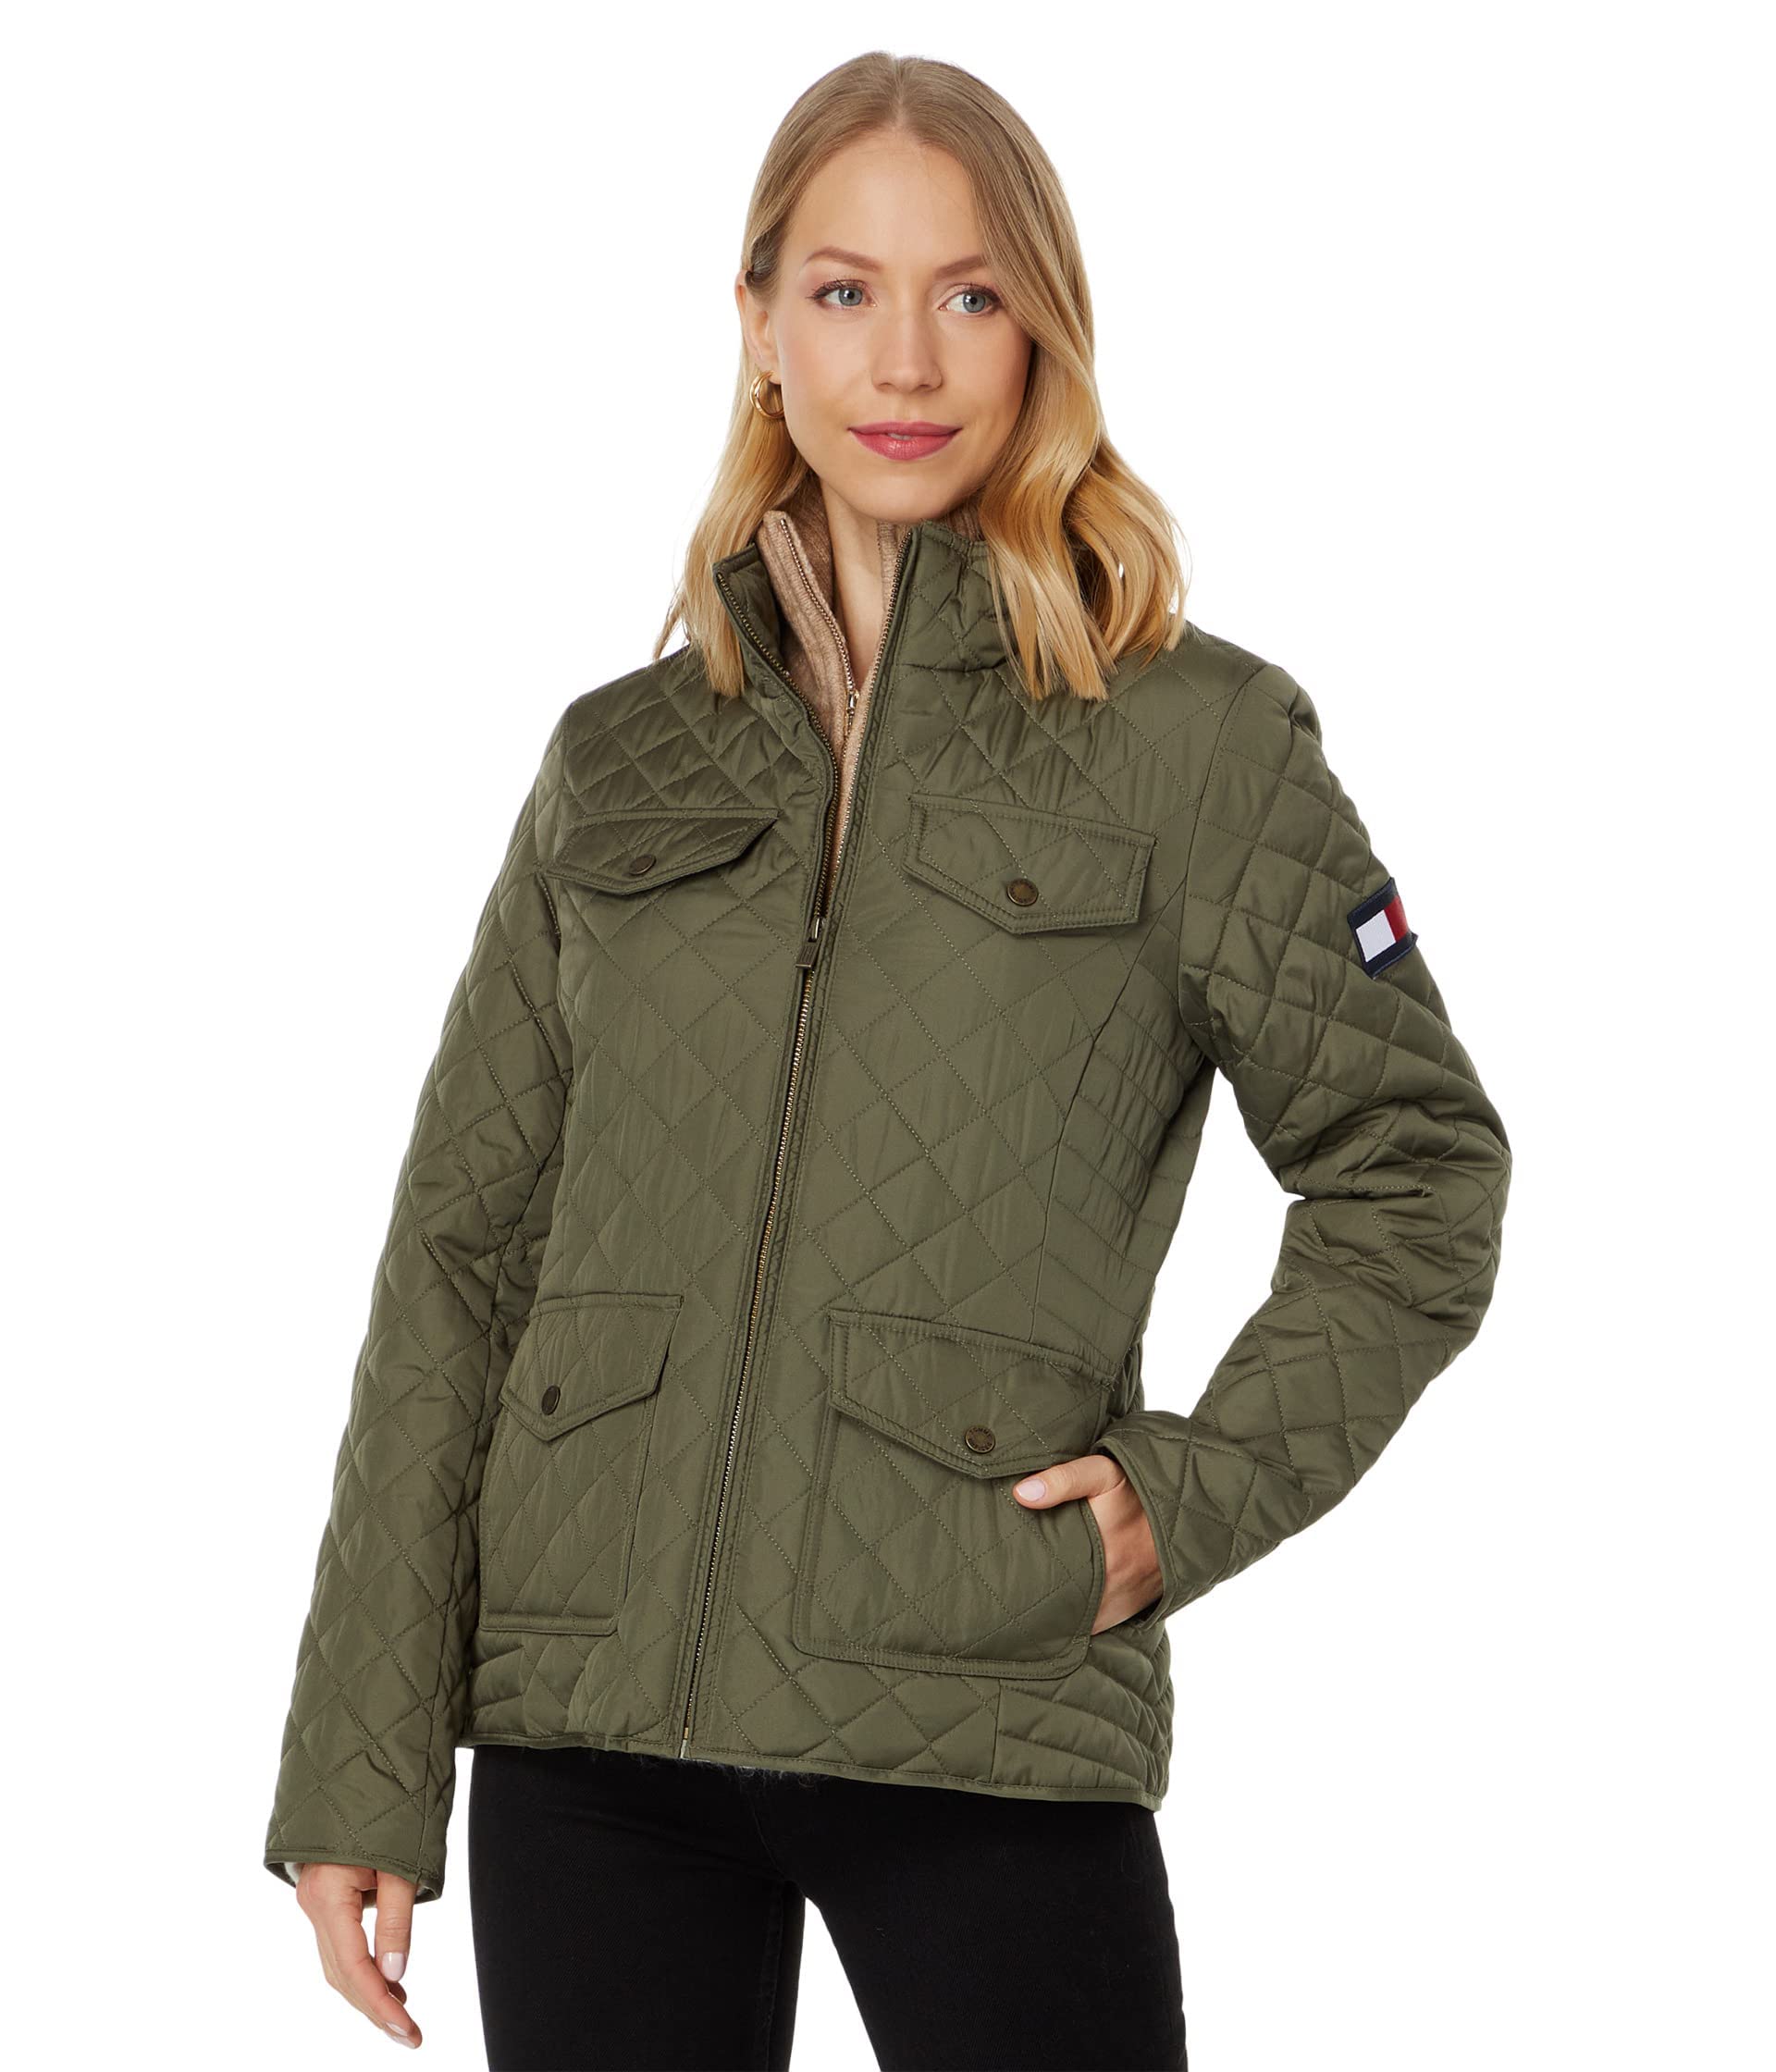 Tommy Hilfiger Quilted Fall Fashion, Lightweight Jacket Women